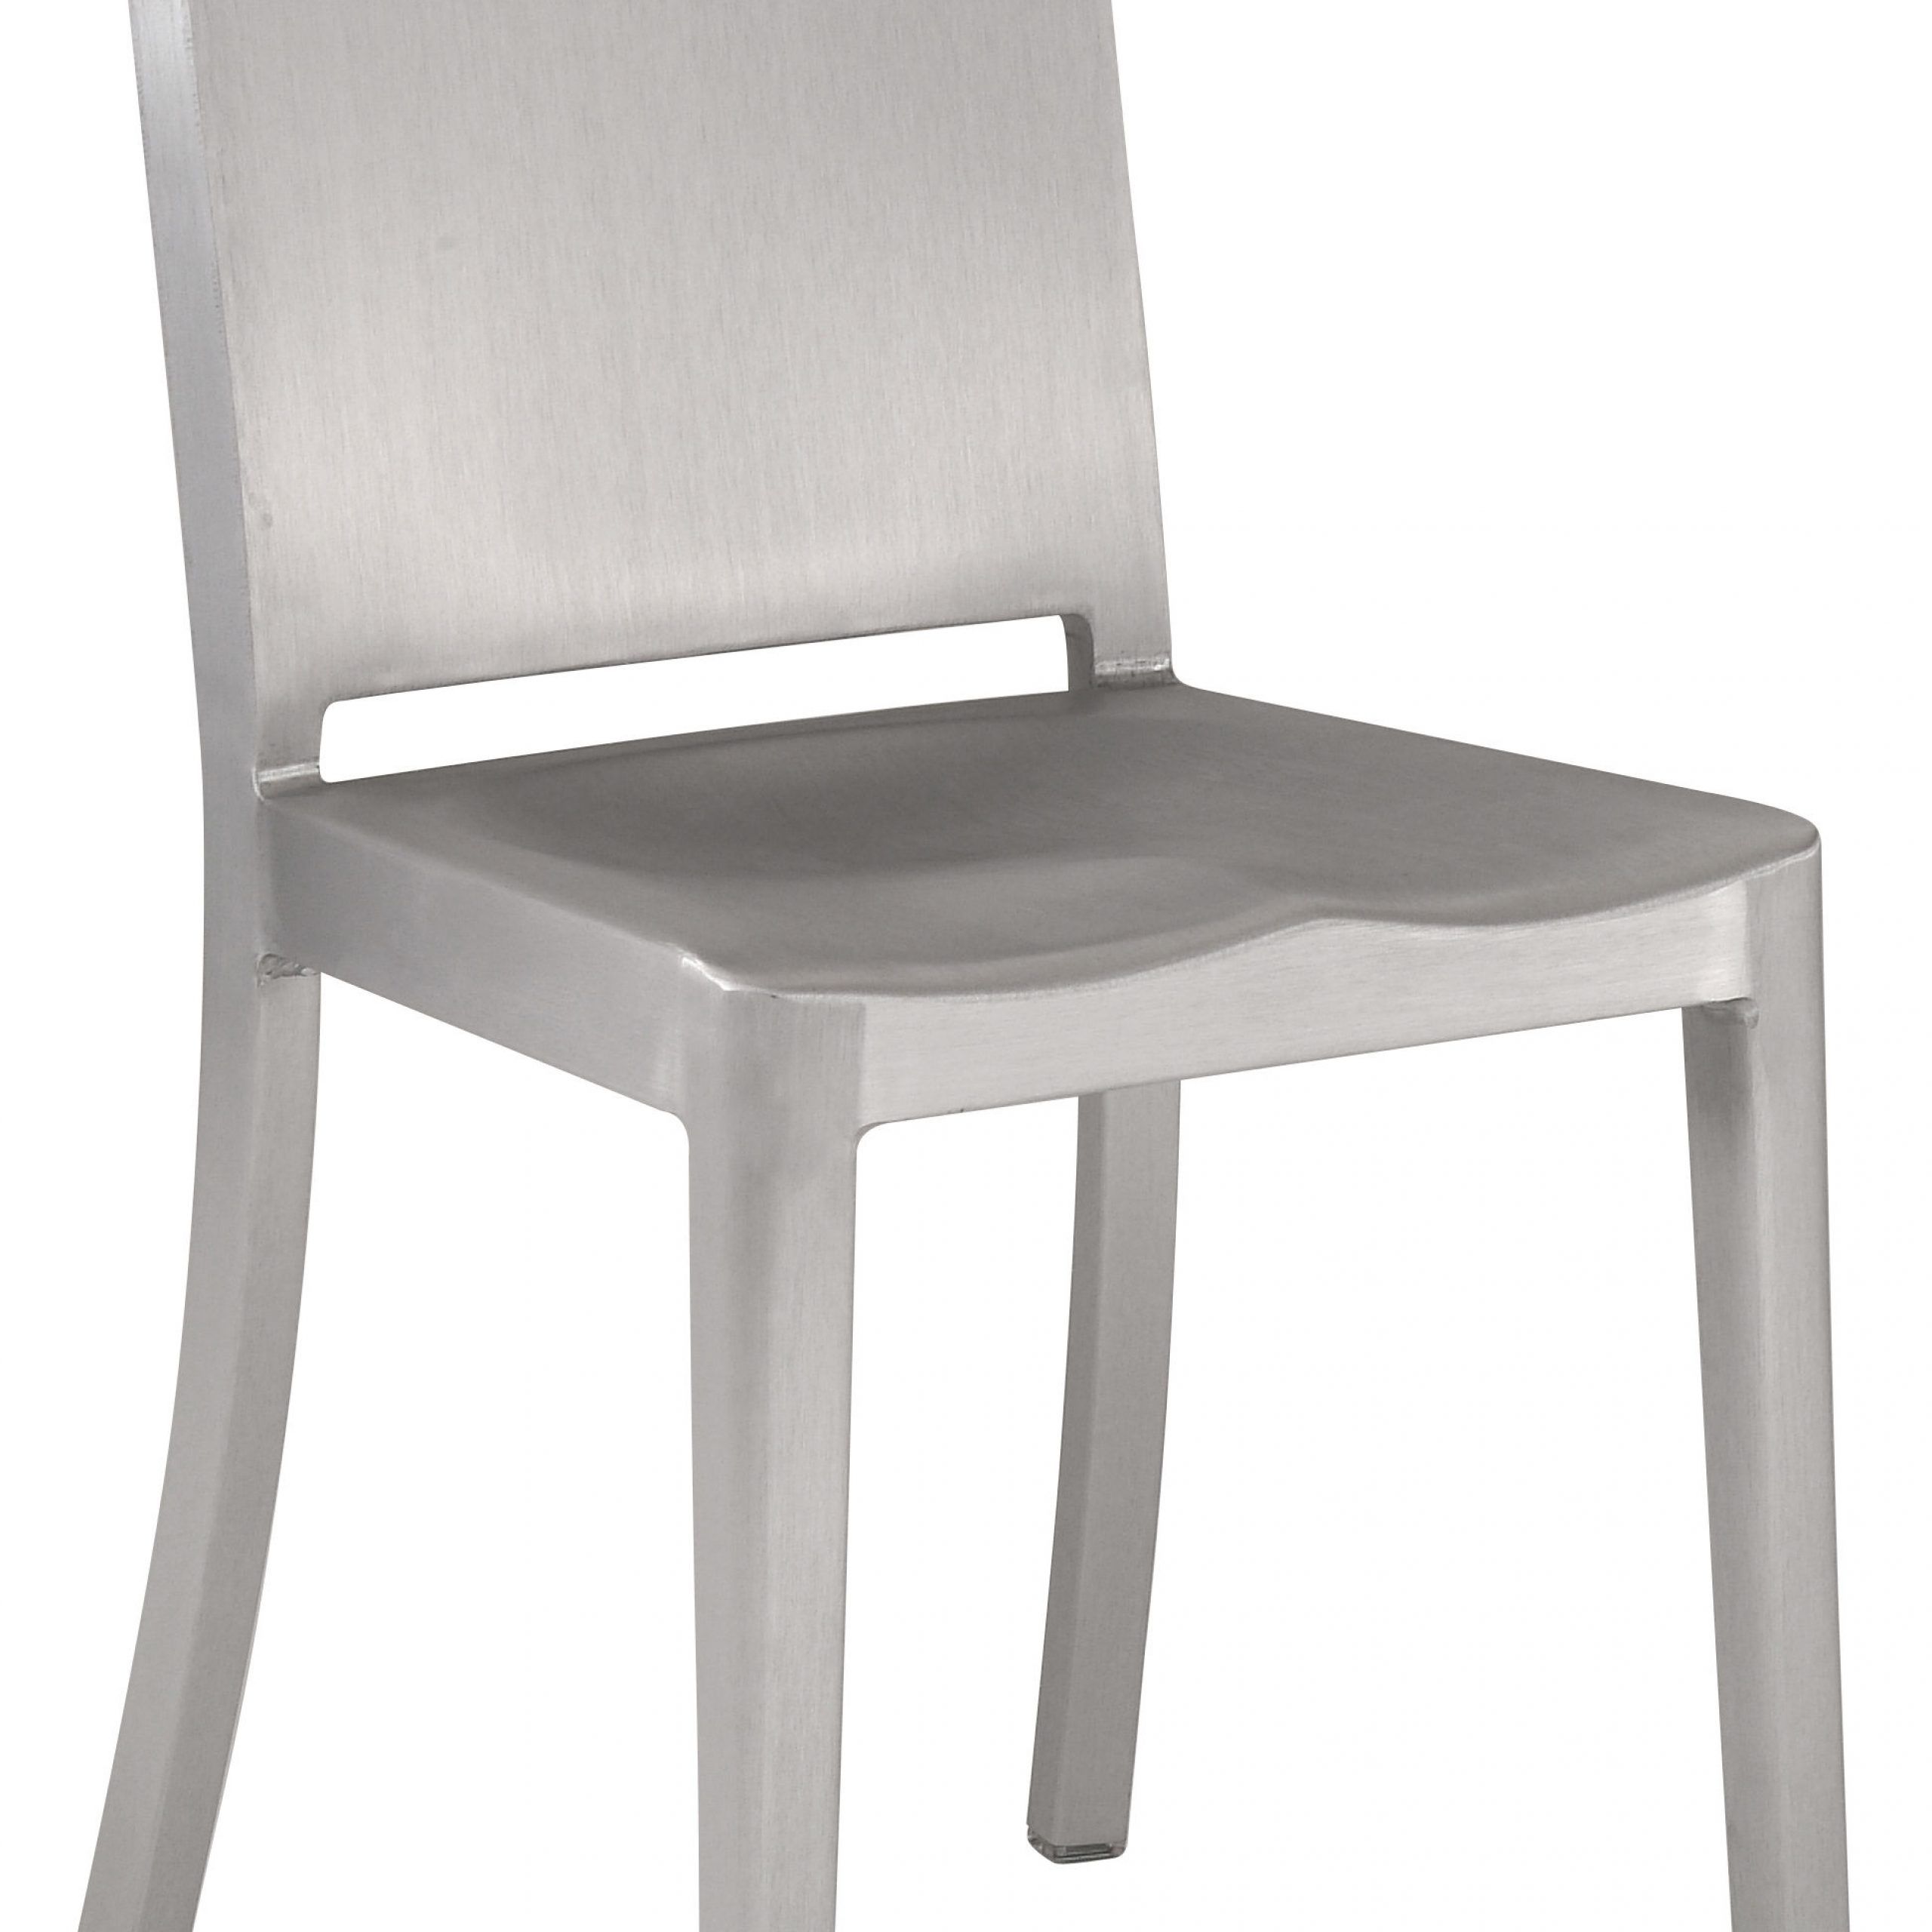 Made In Design Uk With Regard To Brushed Aluminum Outdoor Armchair Sets (View 1 of 15)